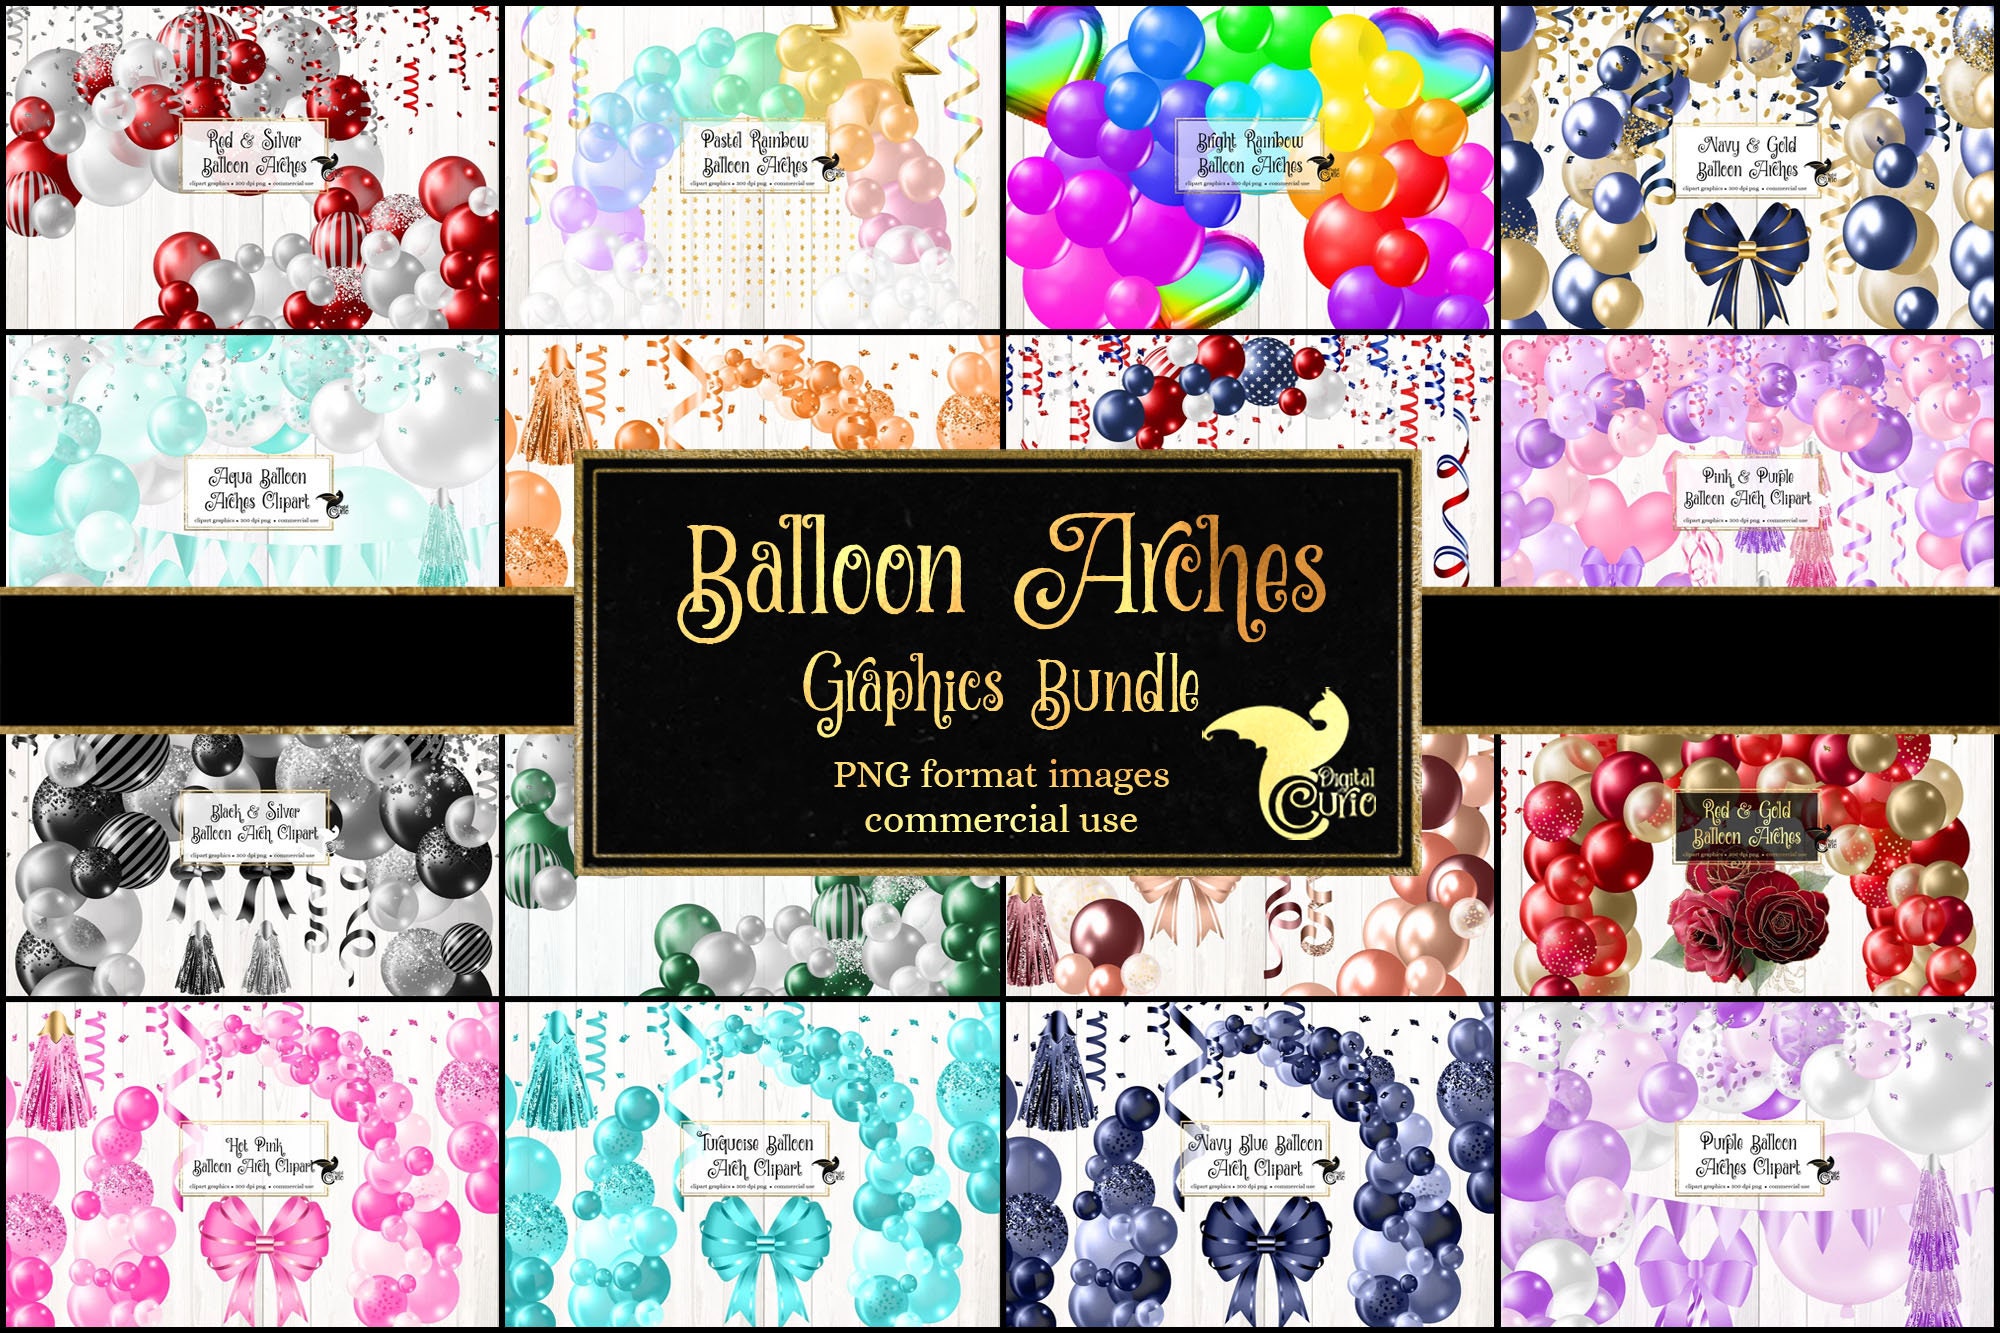 Pastel Rainbow Balloons Clipart Graphic by Digital Curio